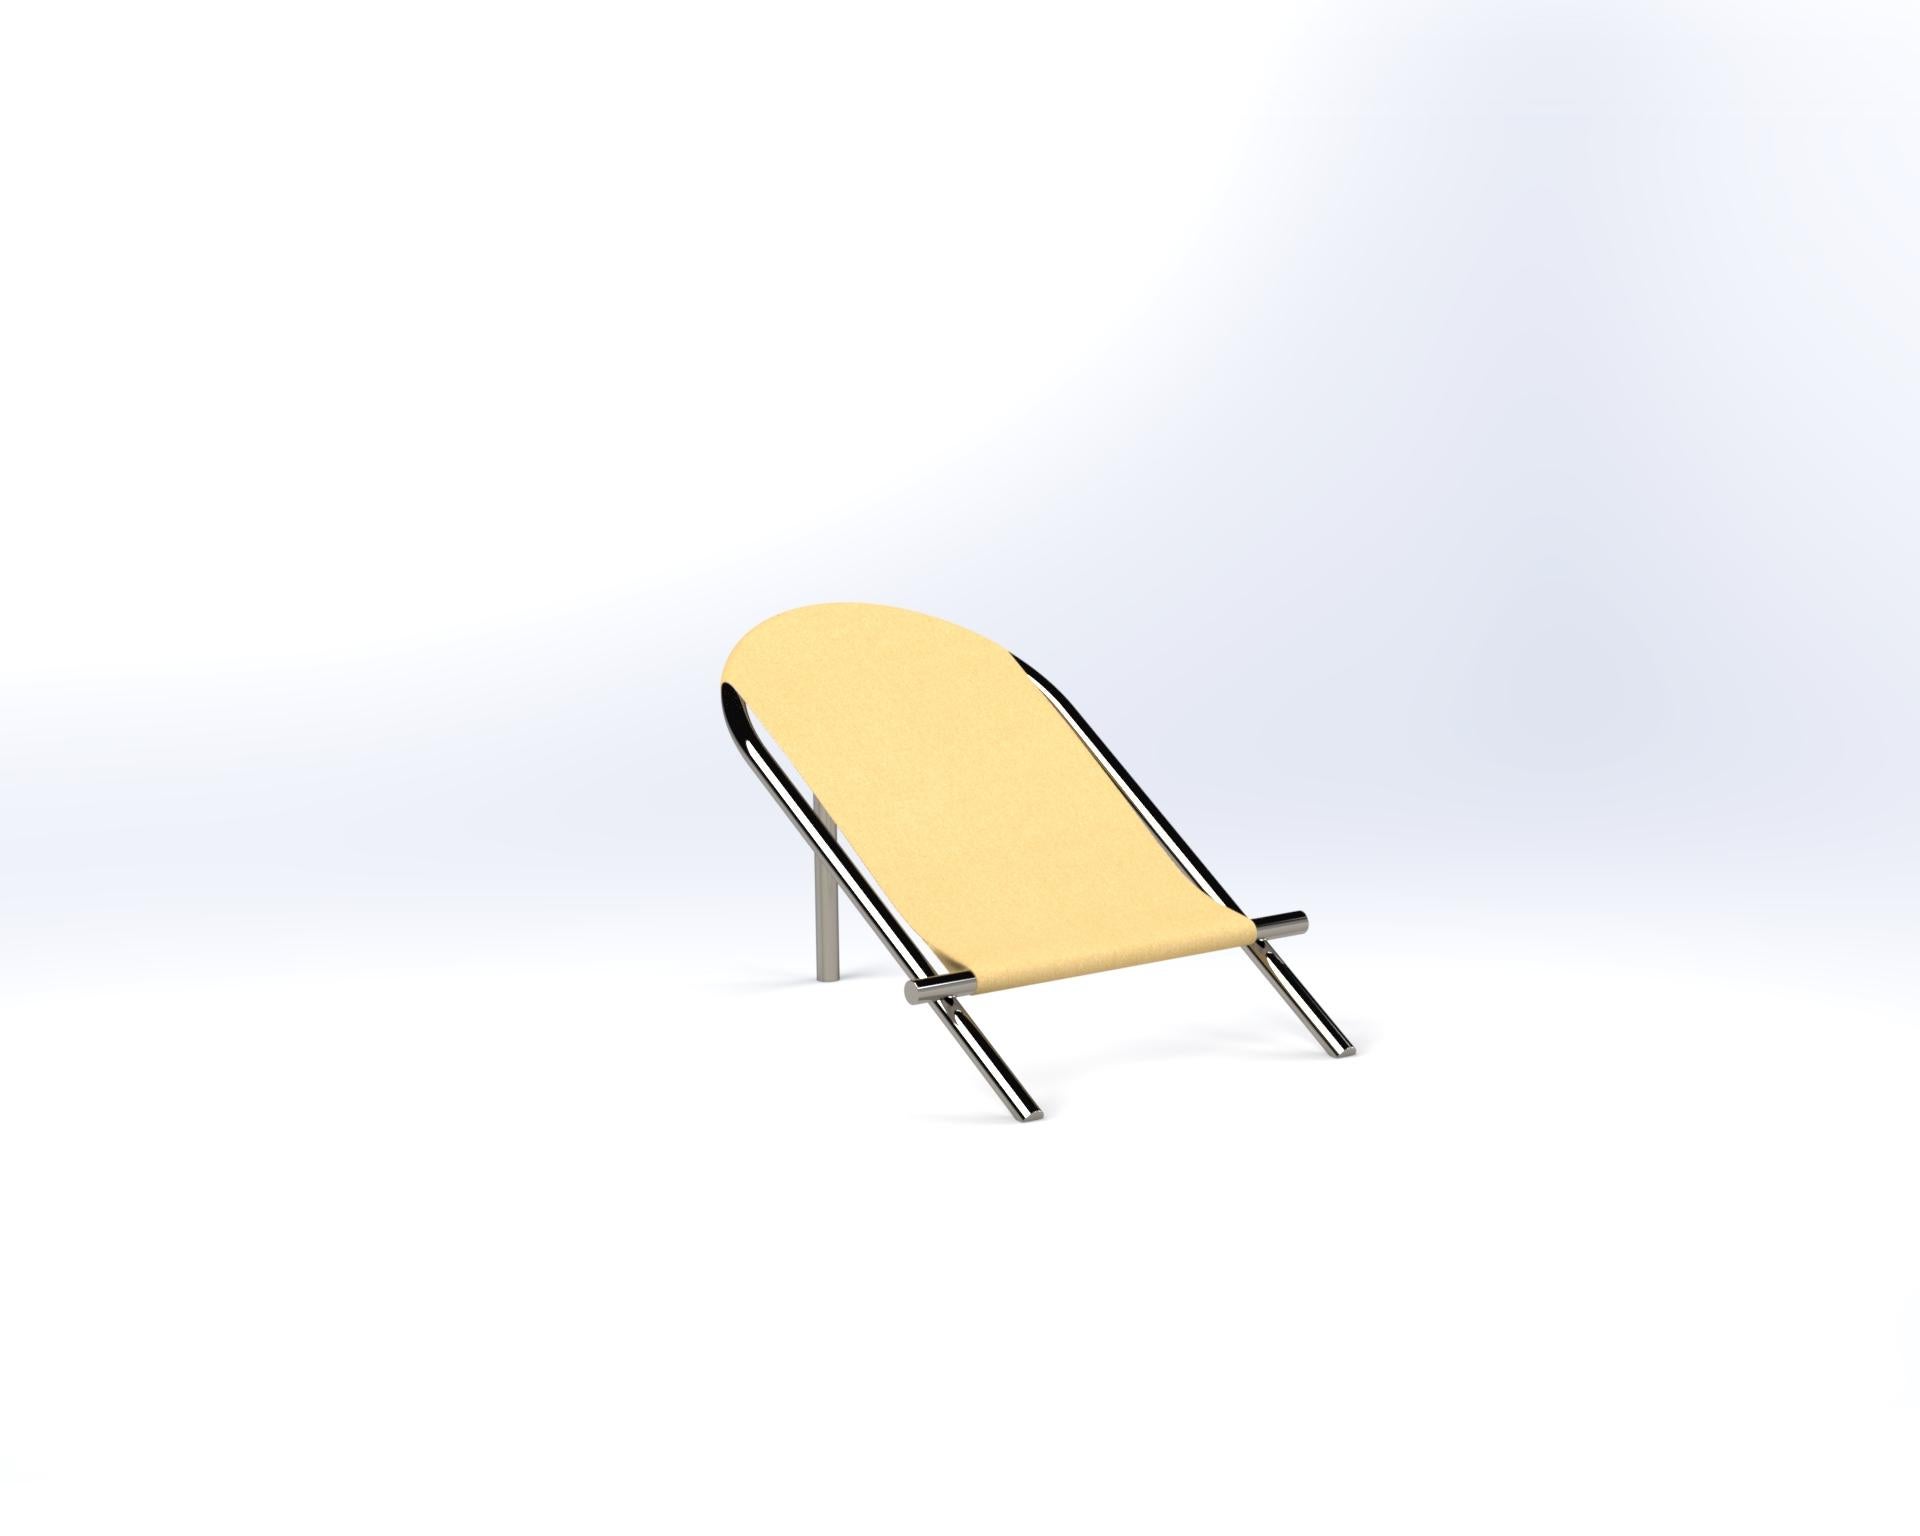 Deck chair by Krzywda
Dimensions: 100 W x 129 D x 83 H cm
Materials: Stainless steel, canvas

Individually handmade in France by Krzywda. All materials employed are from France. The individually selected marble blocks are extracted from french